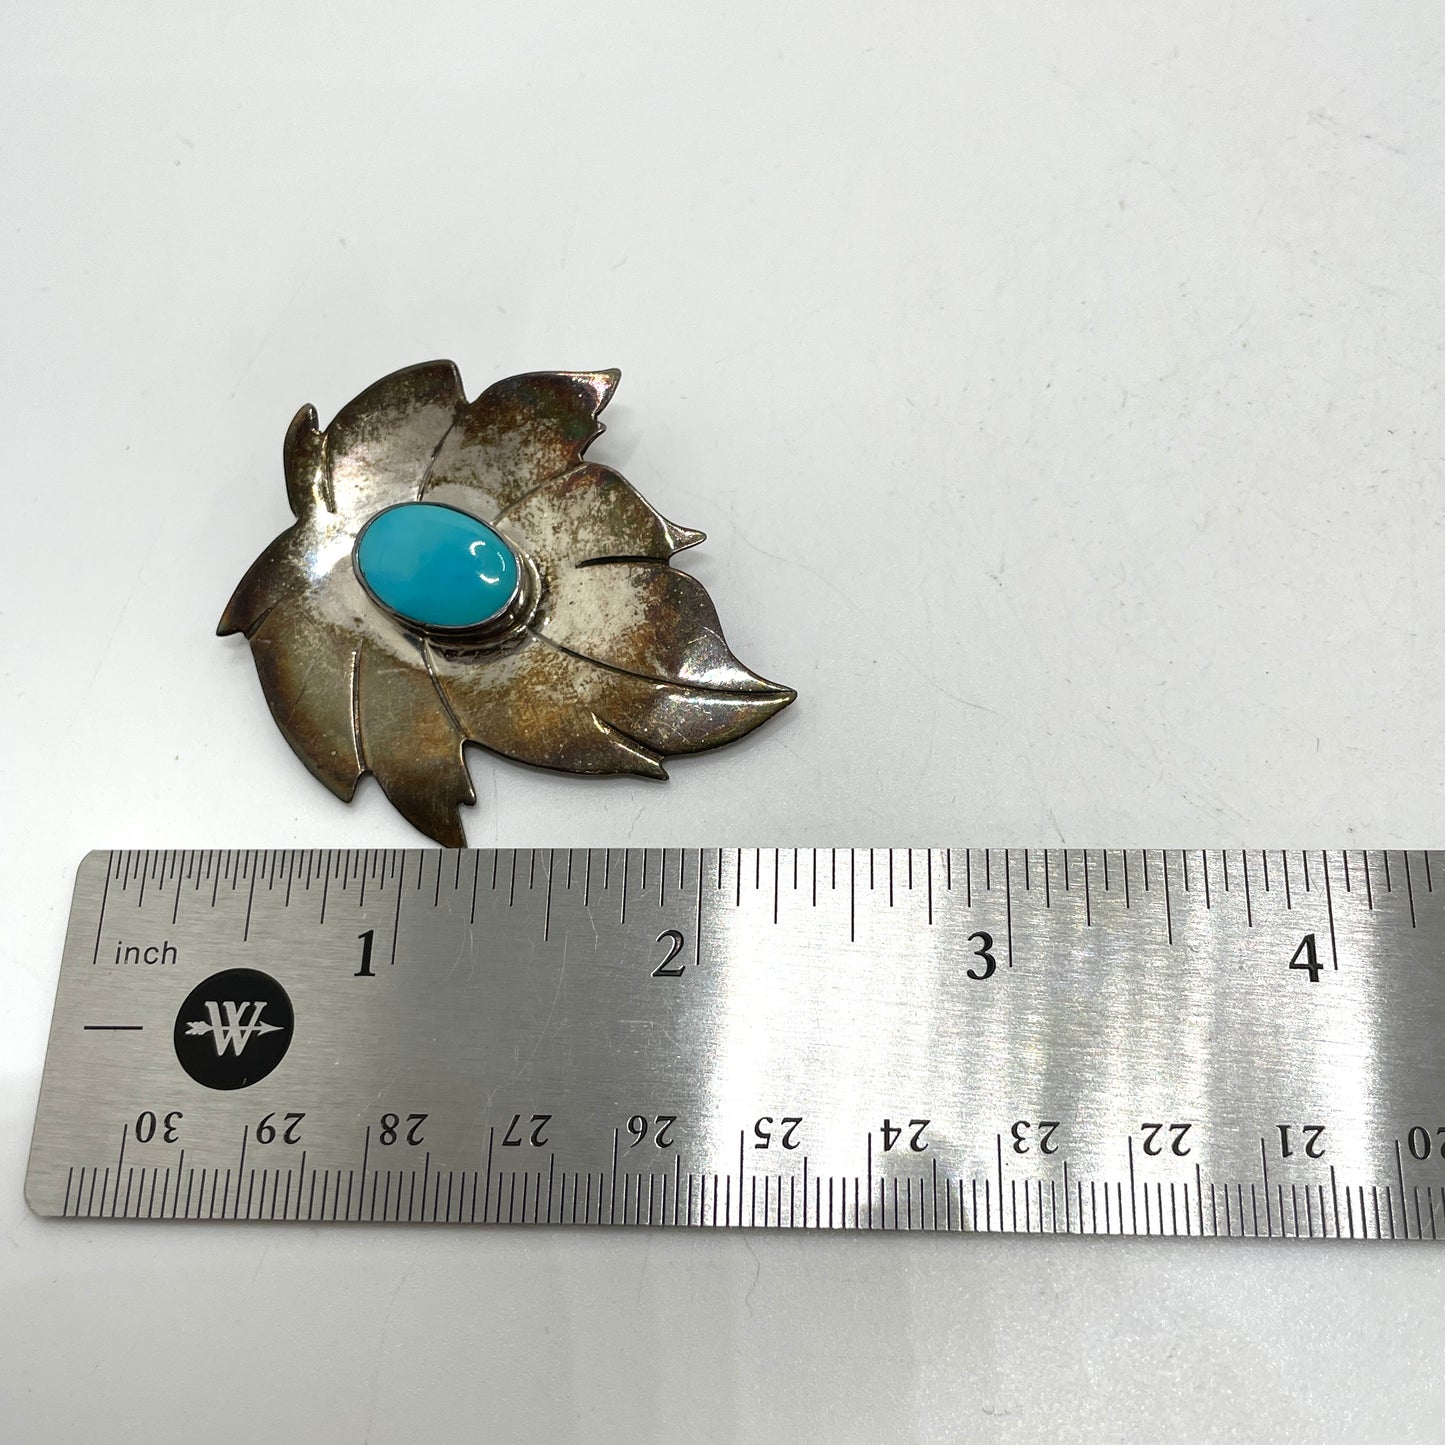 Vintage Sterling Silver & Turquoise Leaf Pin